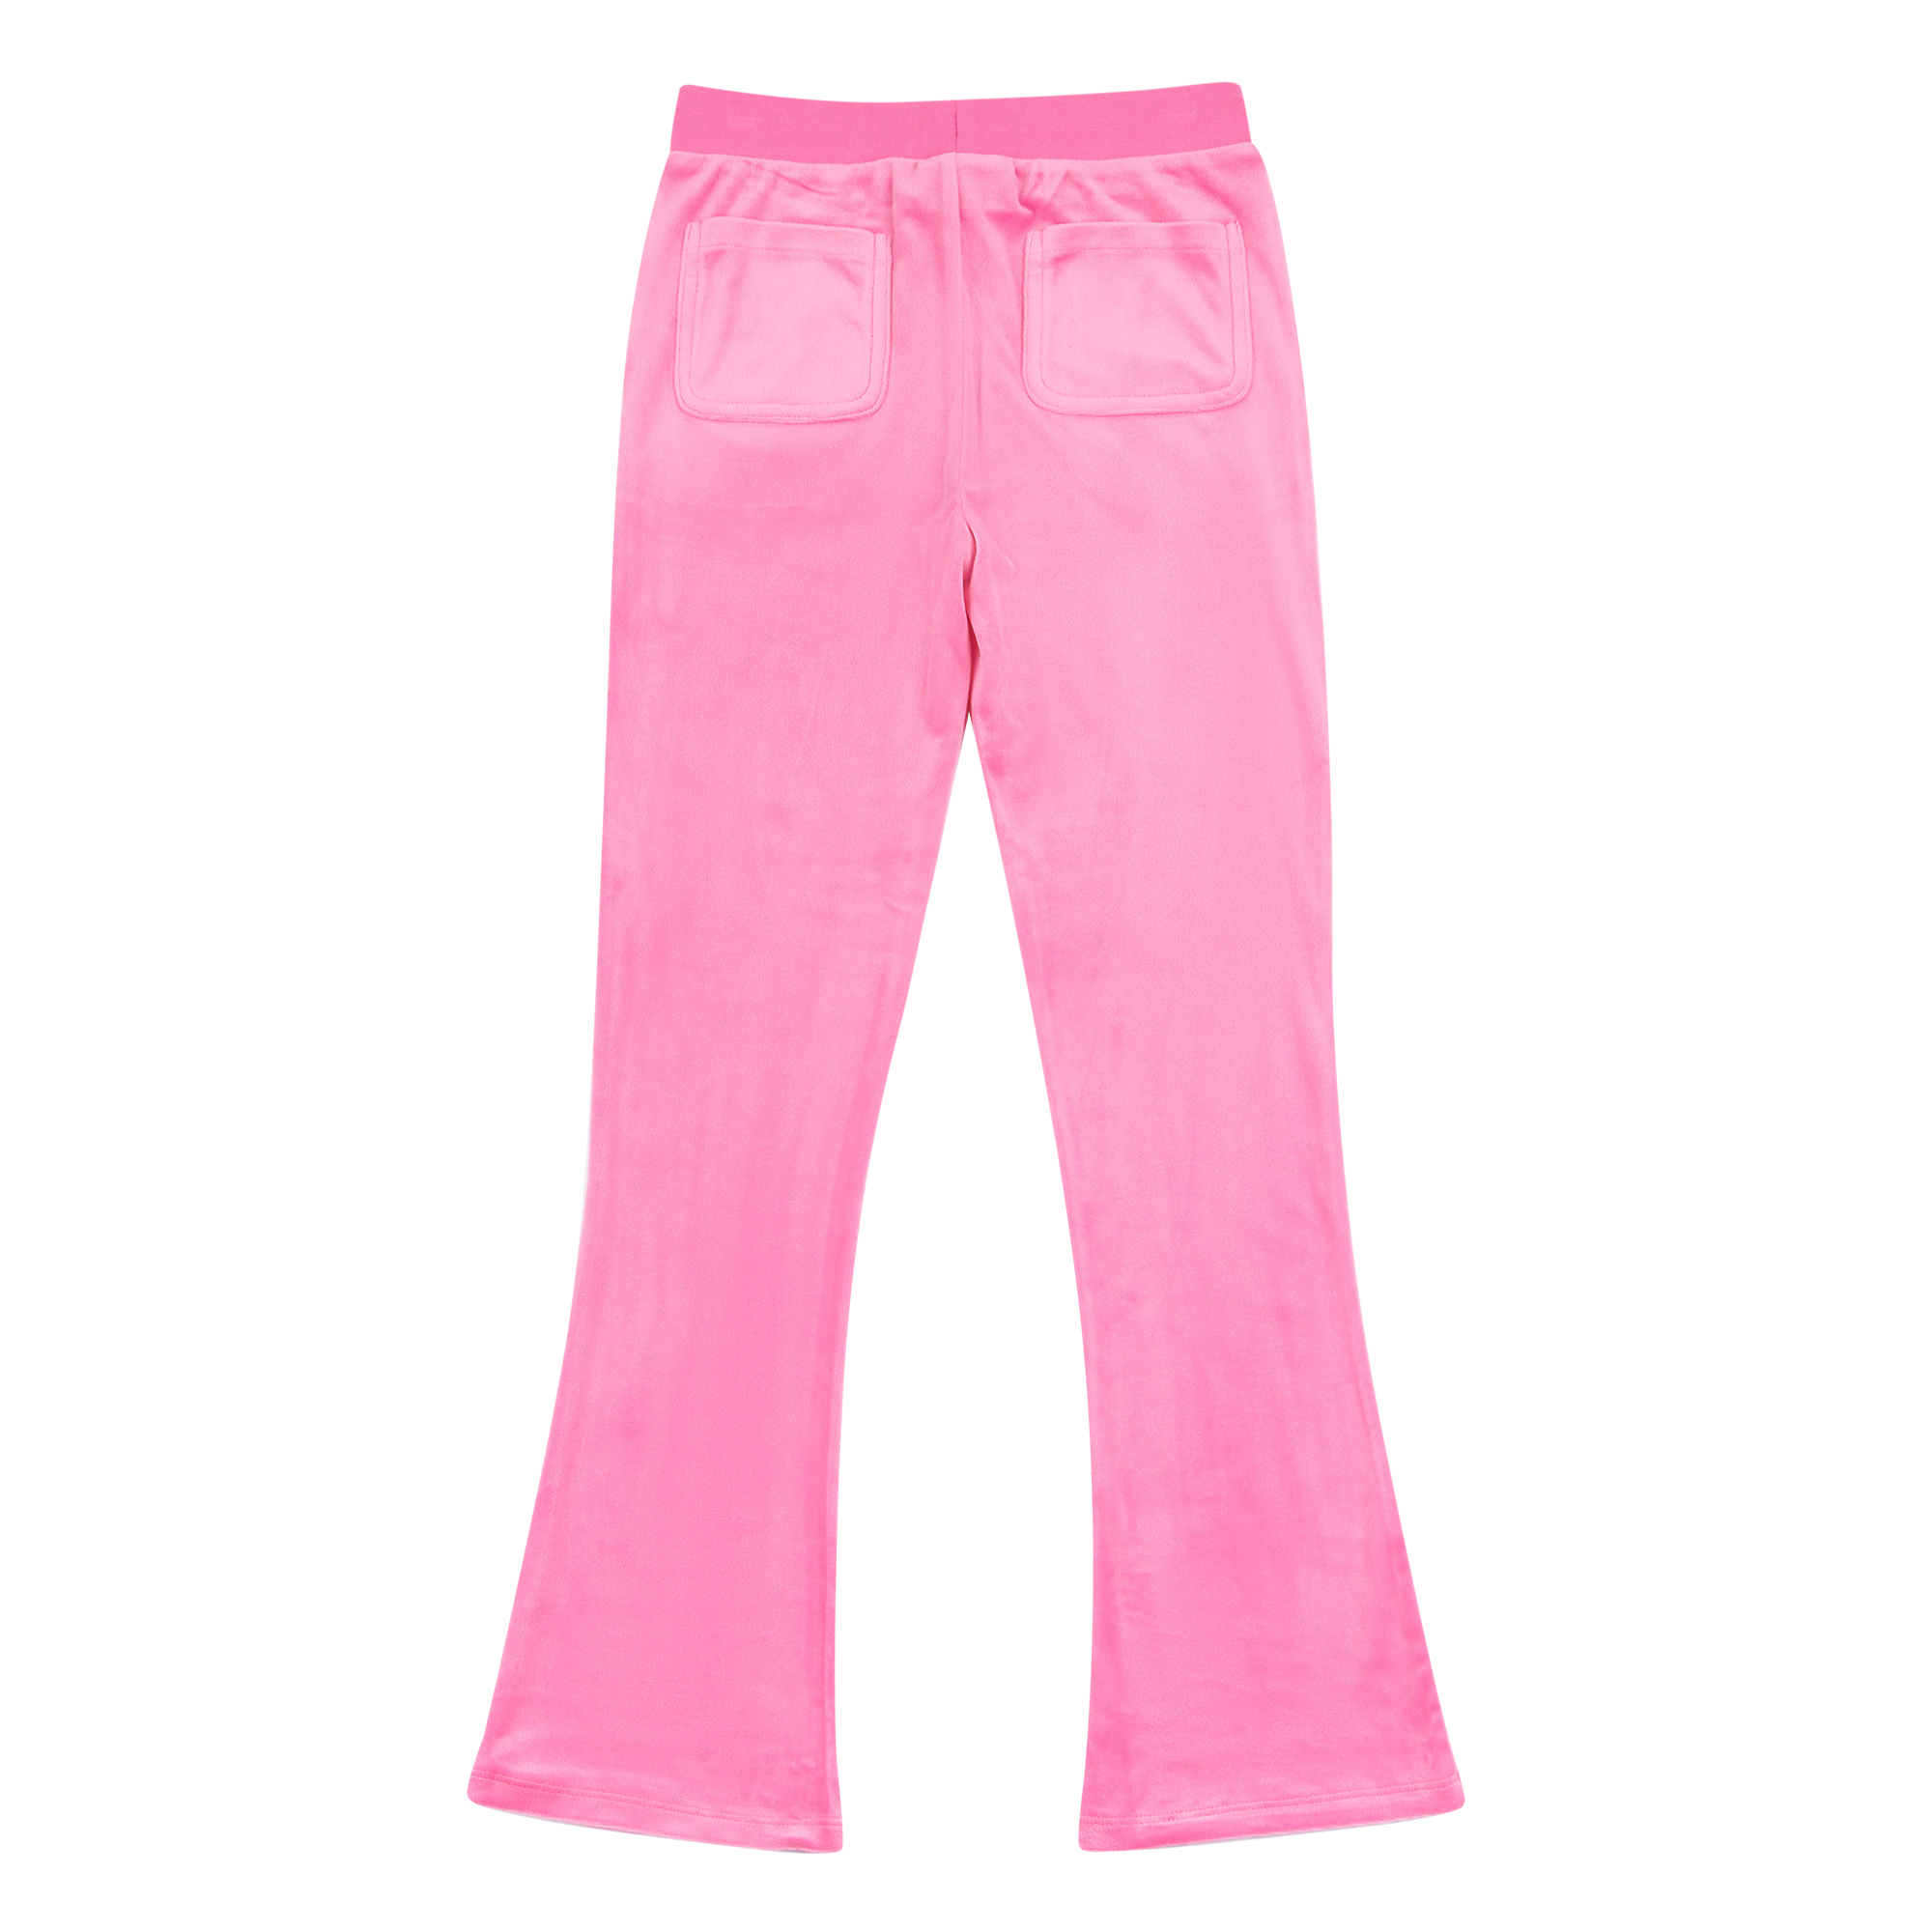 Juicy Couture Velvet Trousers - Pink Nectar » Quick Shipping